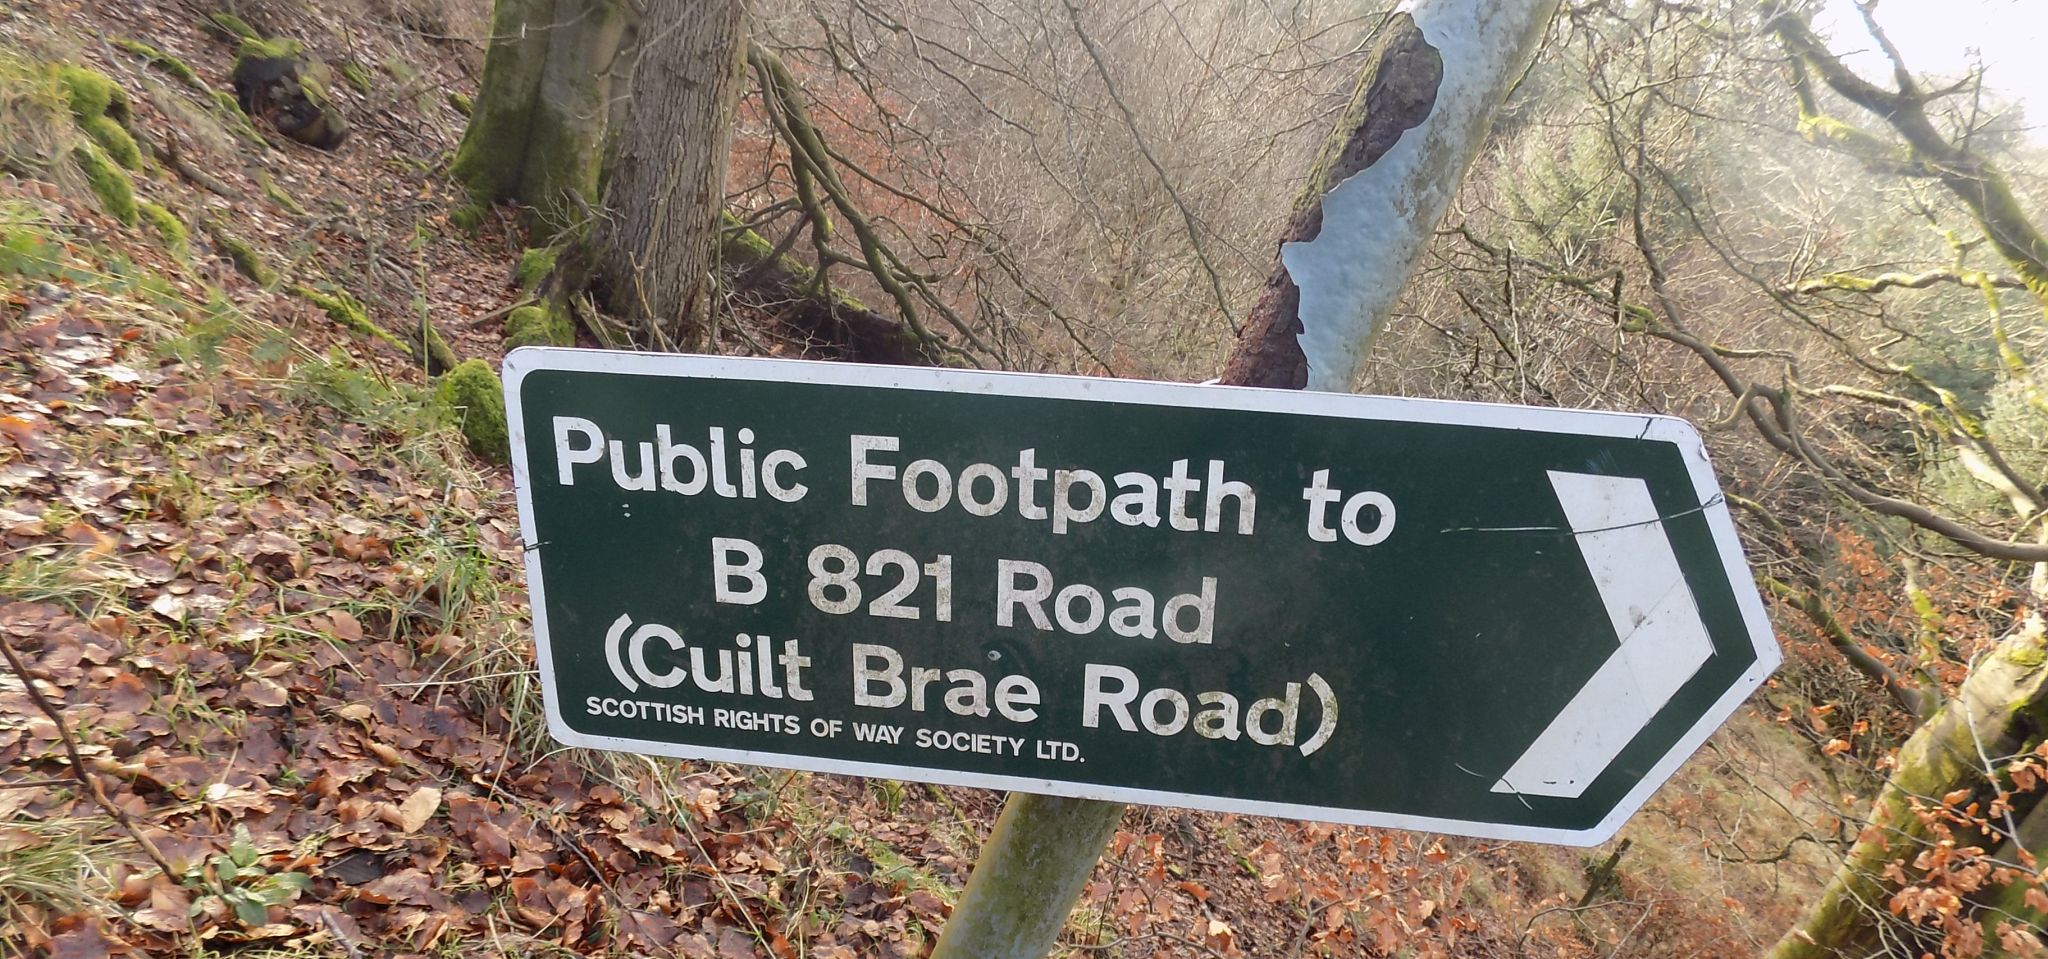 Signpost on path to Coult Brae